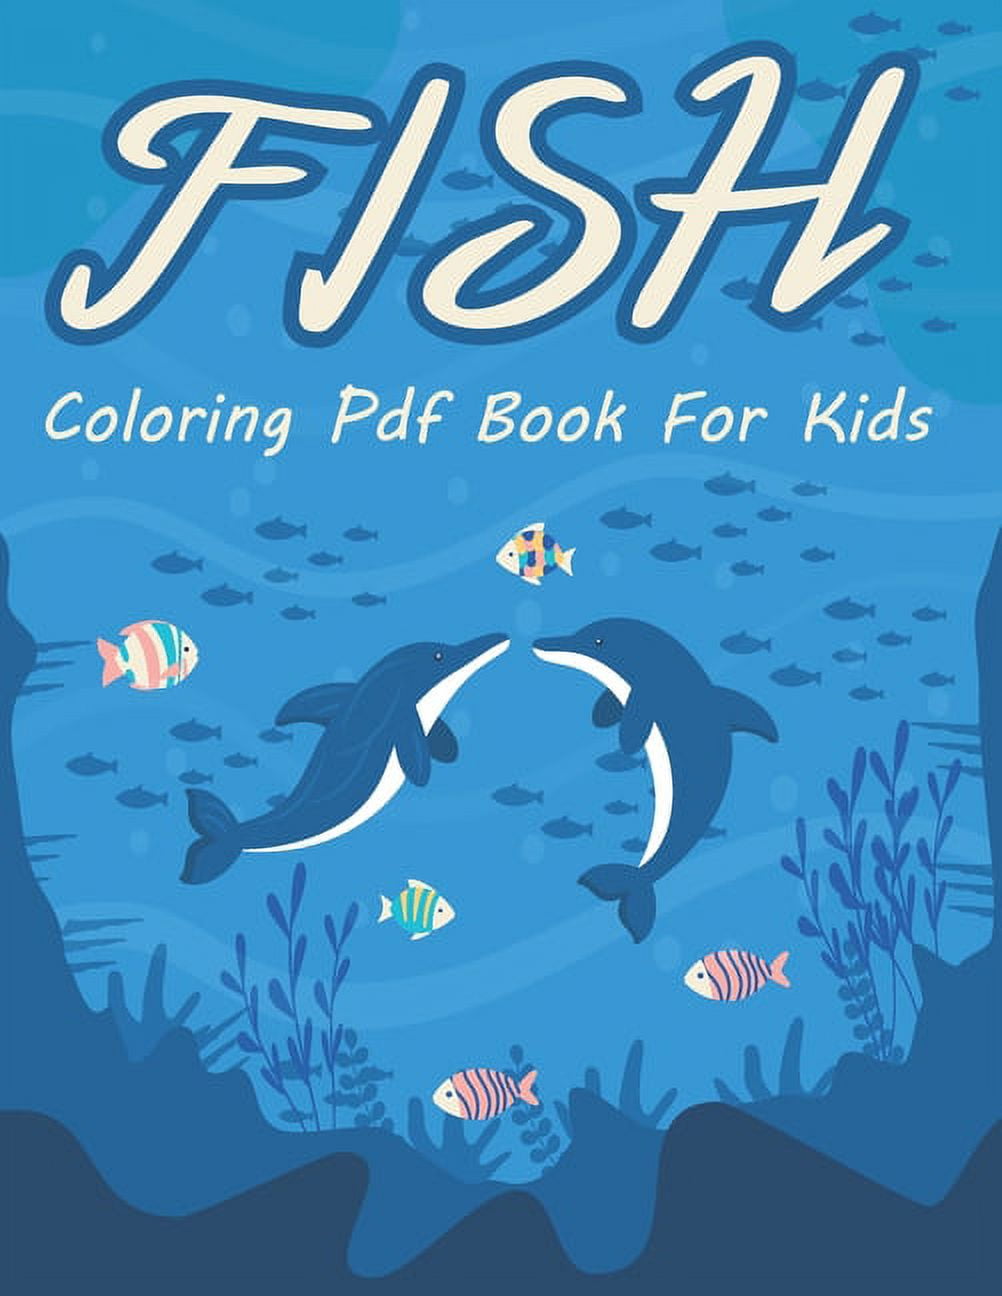 Fish Coloring PDF Book for Kids: This Fish Coloring Book For Relaxation and Stress Relief Coloring Book For Grown-Ups and Kids, Great Gift For Any Fish Lovers, [Book]